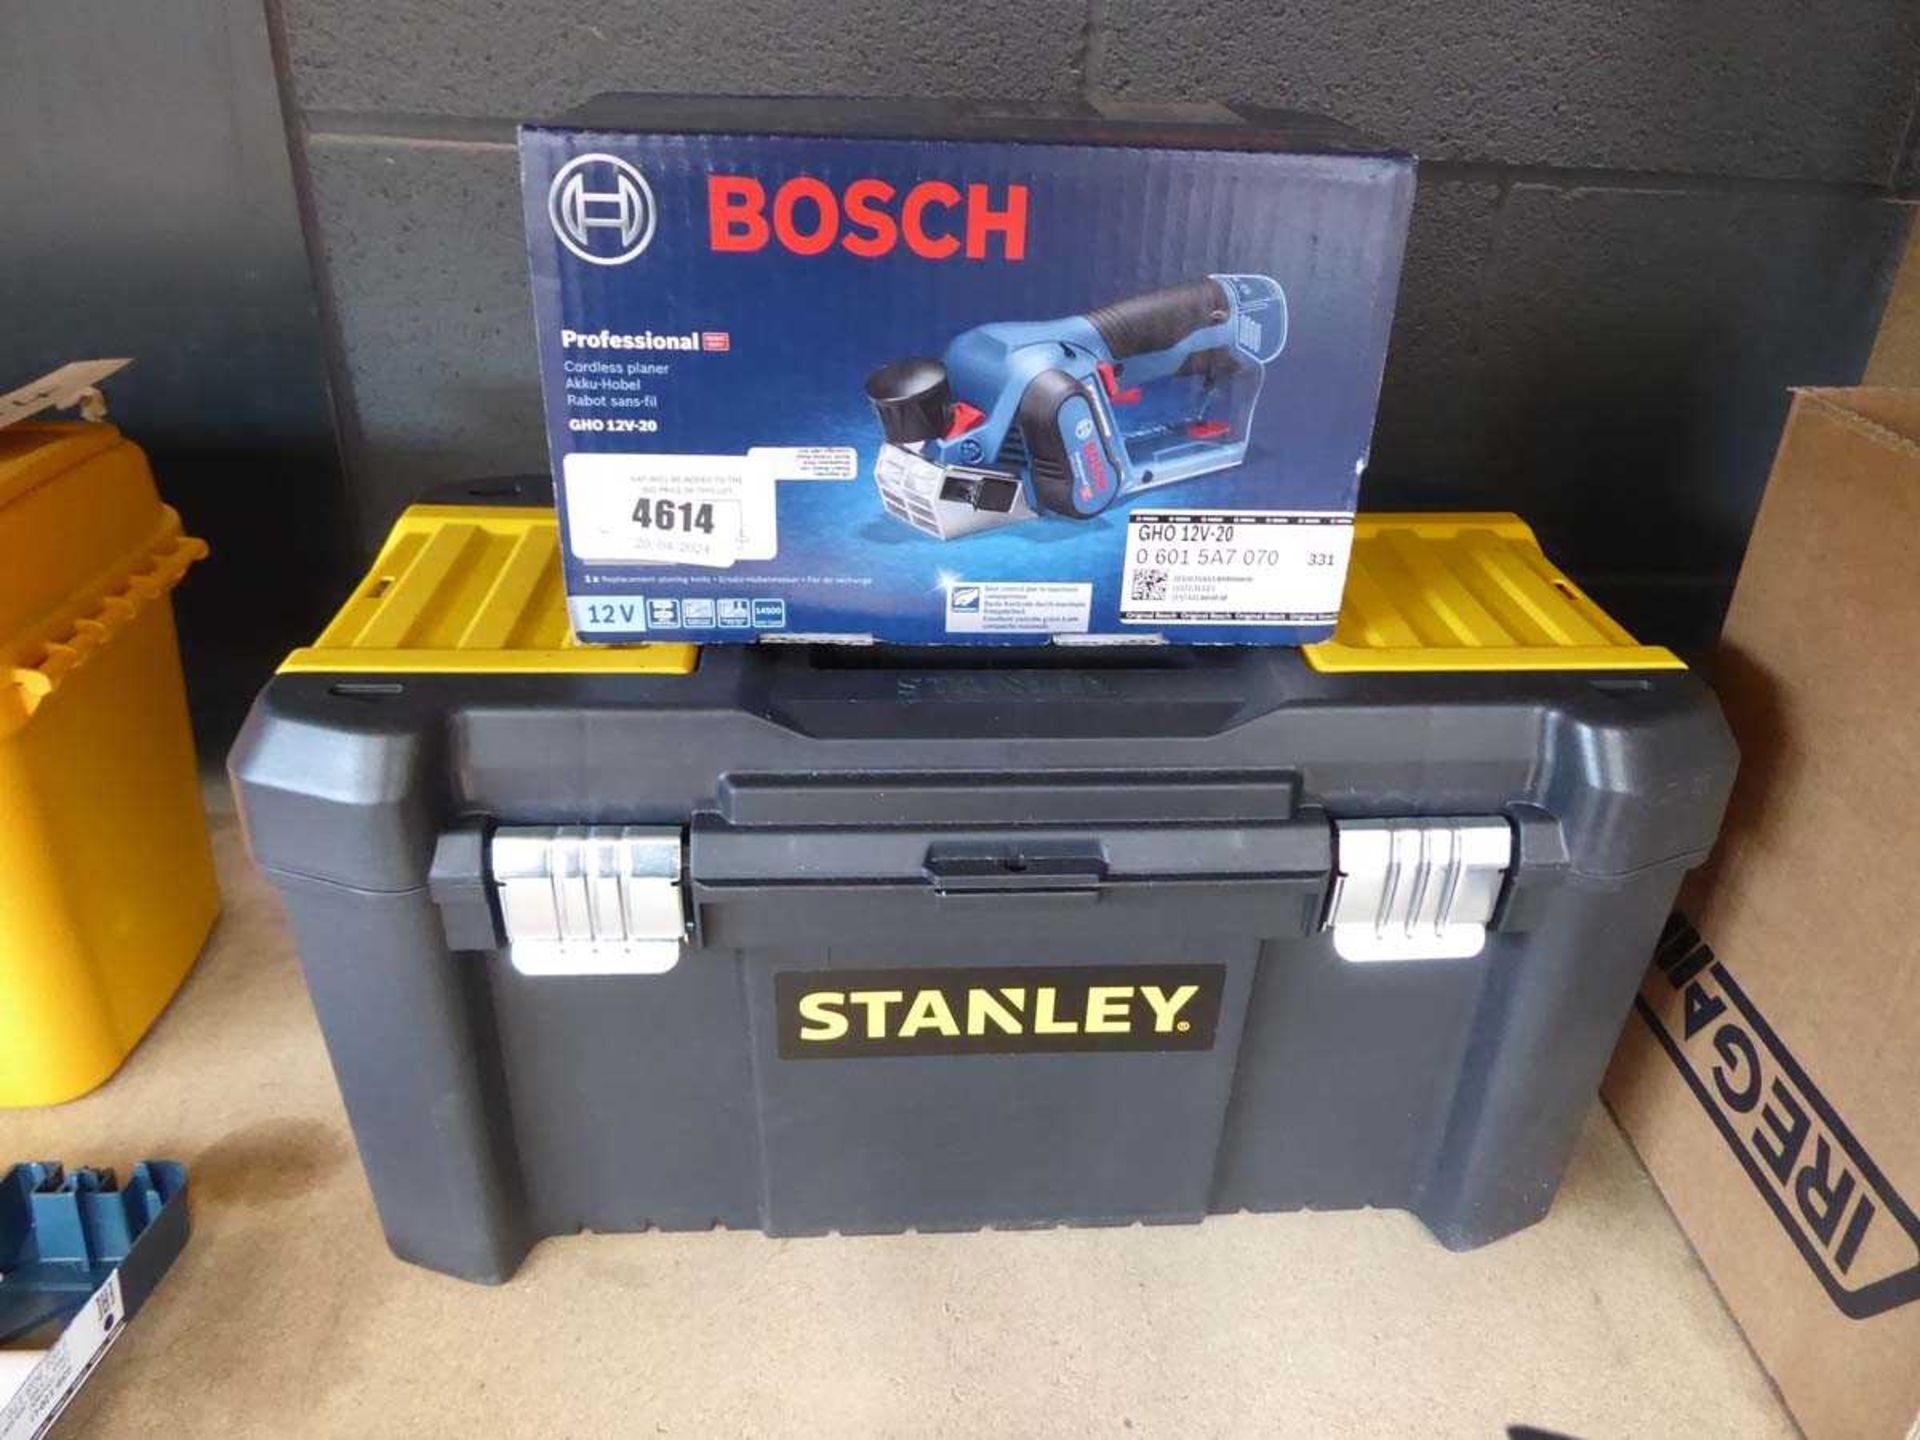 +VAT Bosch cordless planer and empty Stanley tool box Bosch planer: Bare unit only